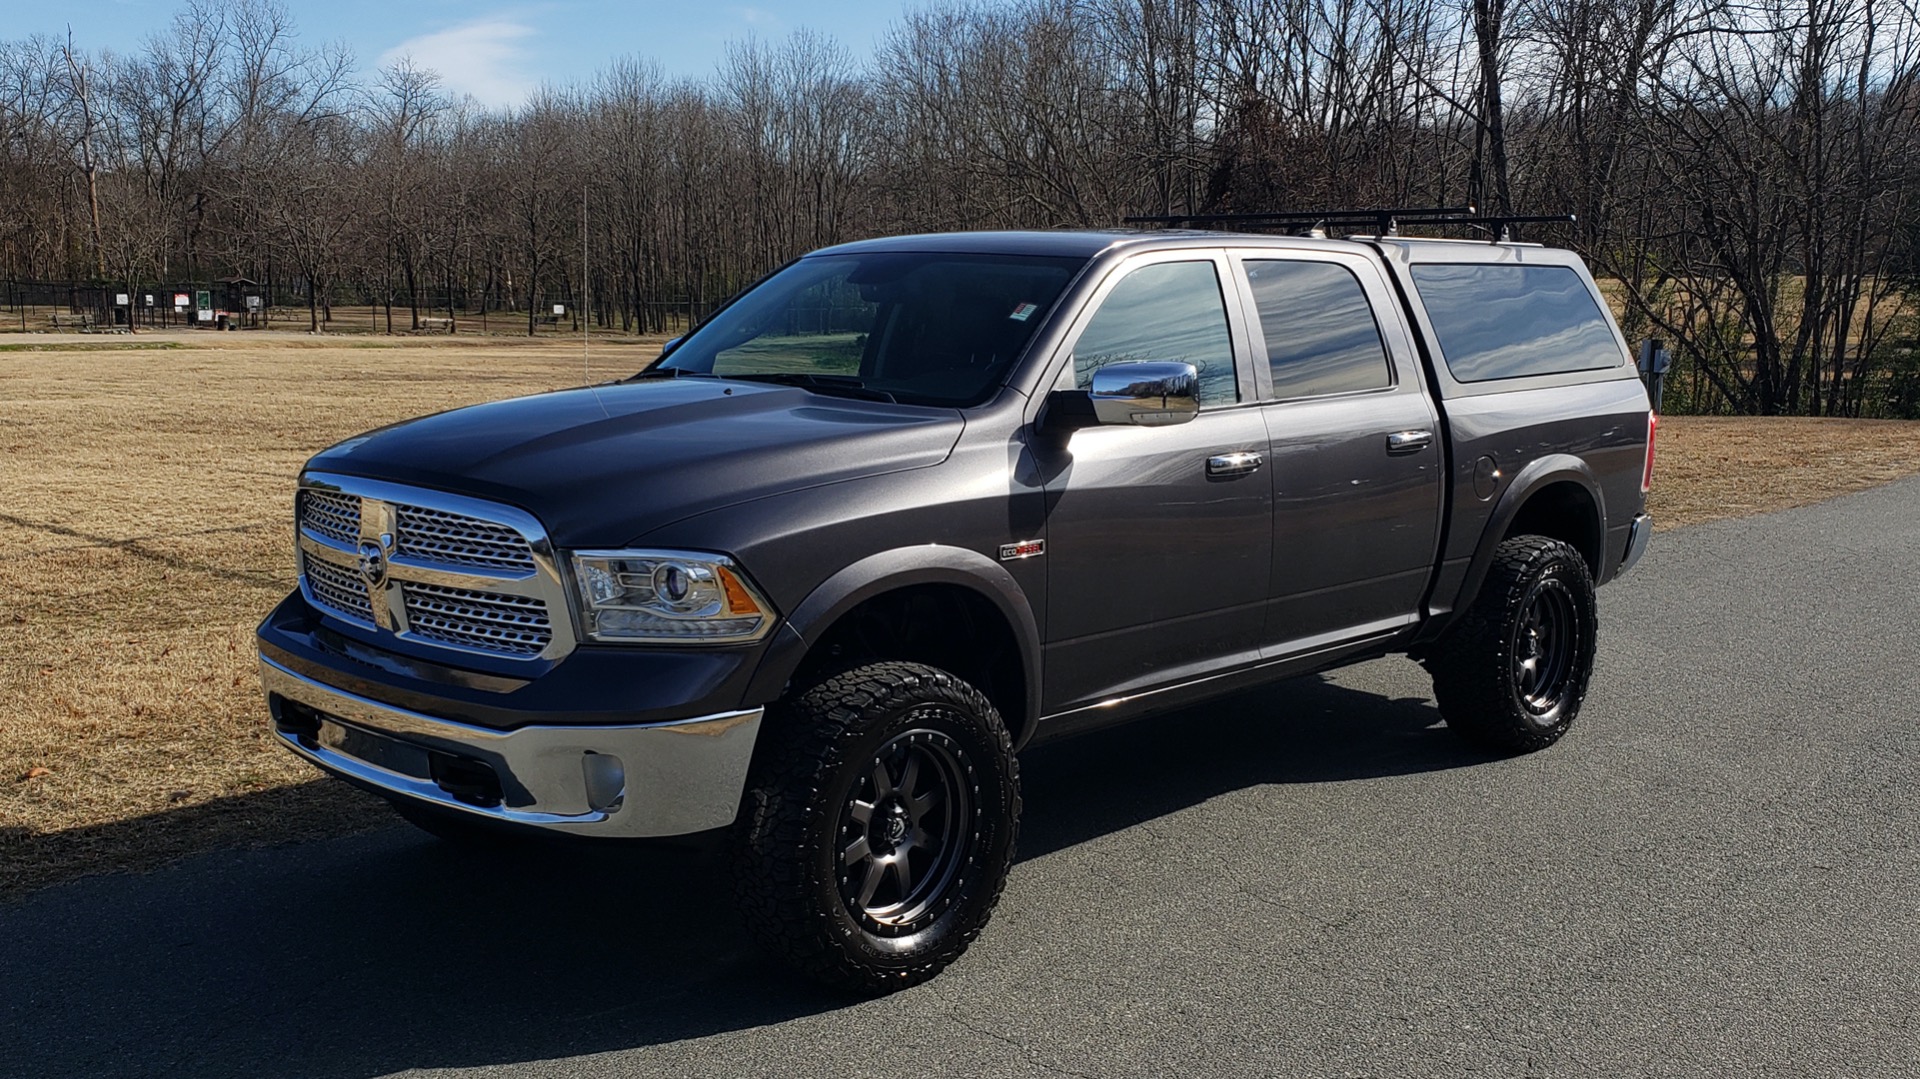 Used 2016 Ram 1500 LARAMIE CC 4X4 / DIESEL/LIFT/CUSTOM for sale Sold at Formula Imports in Charlotte NC 28227 2